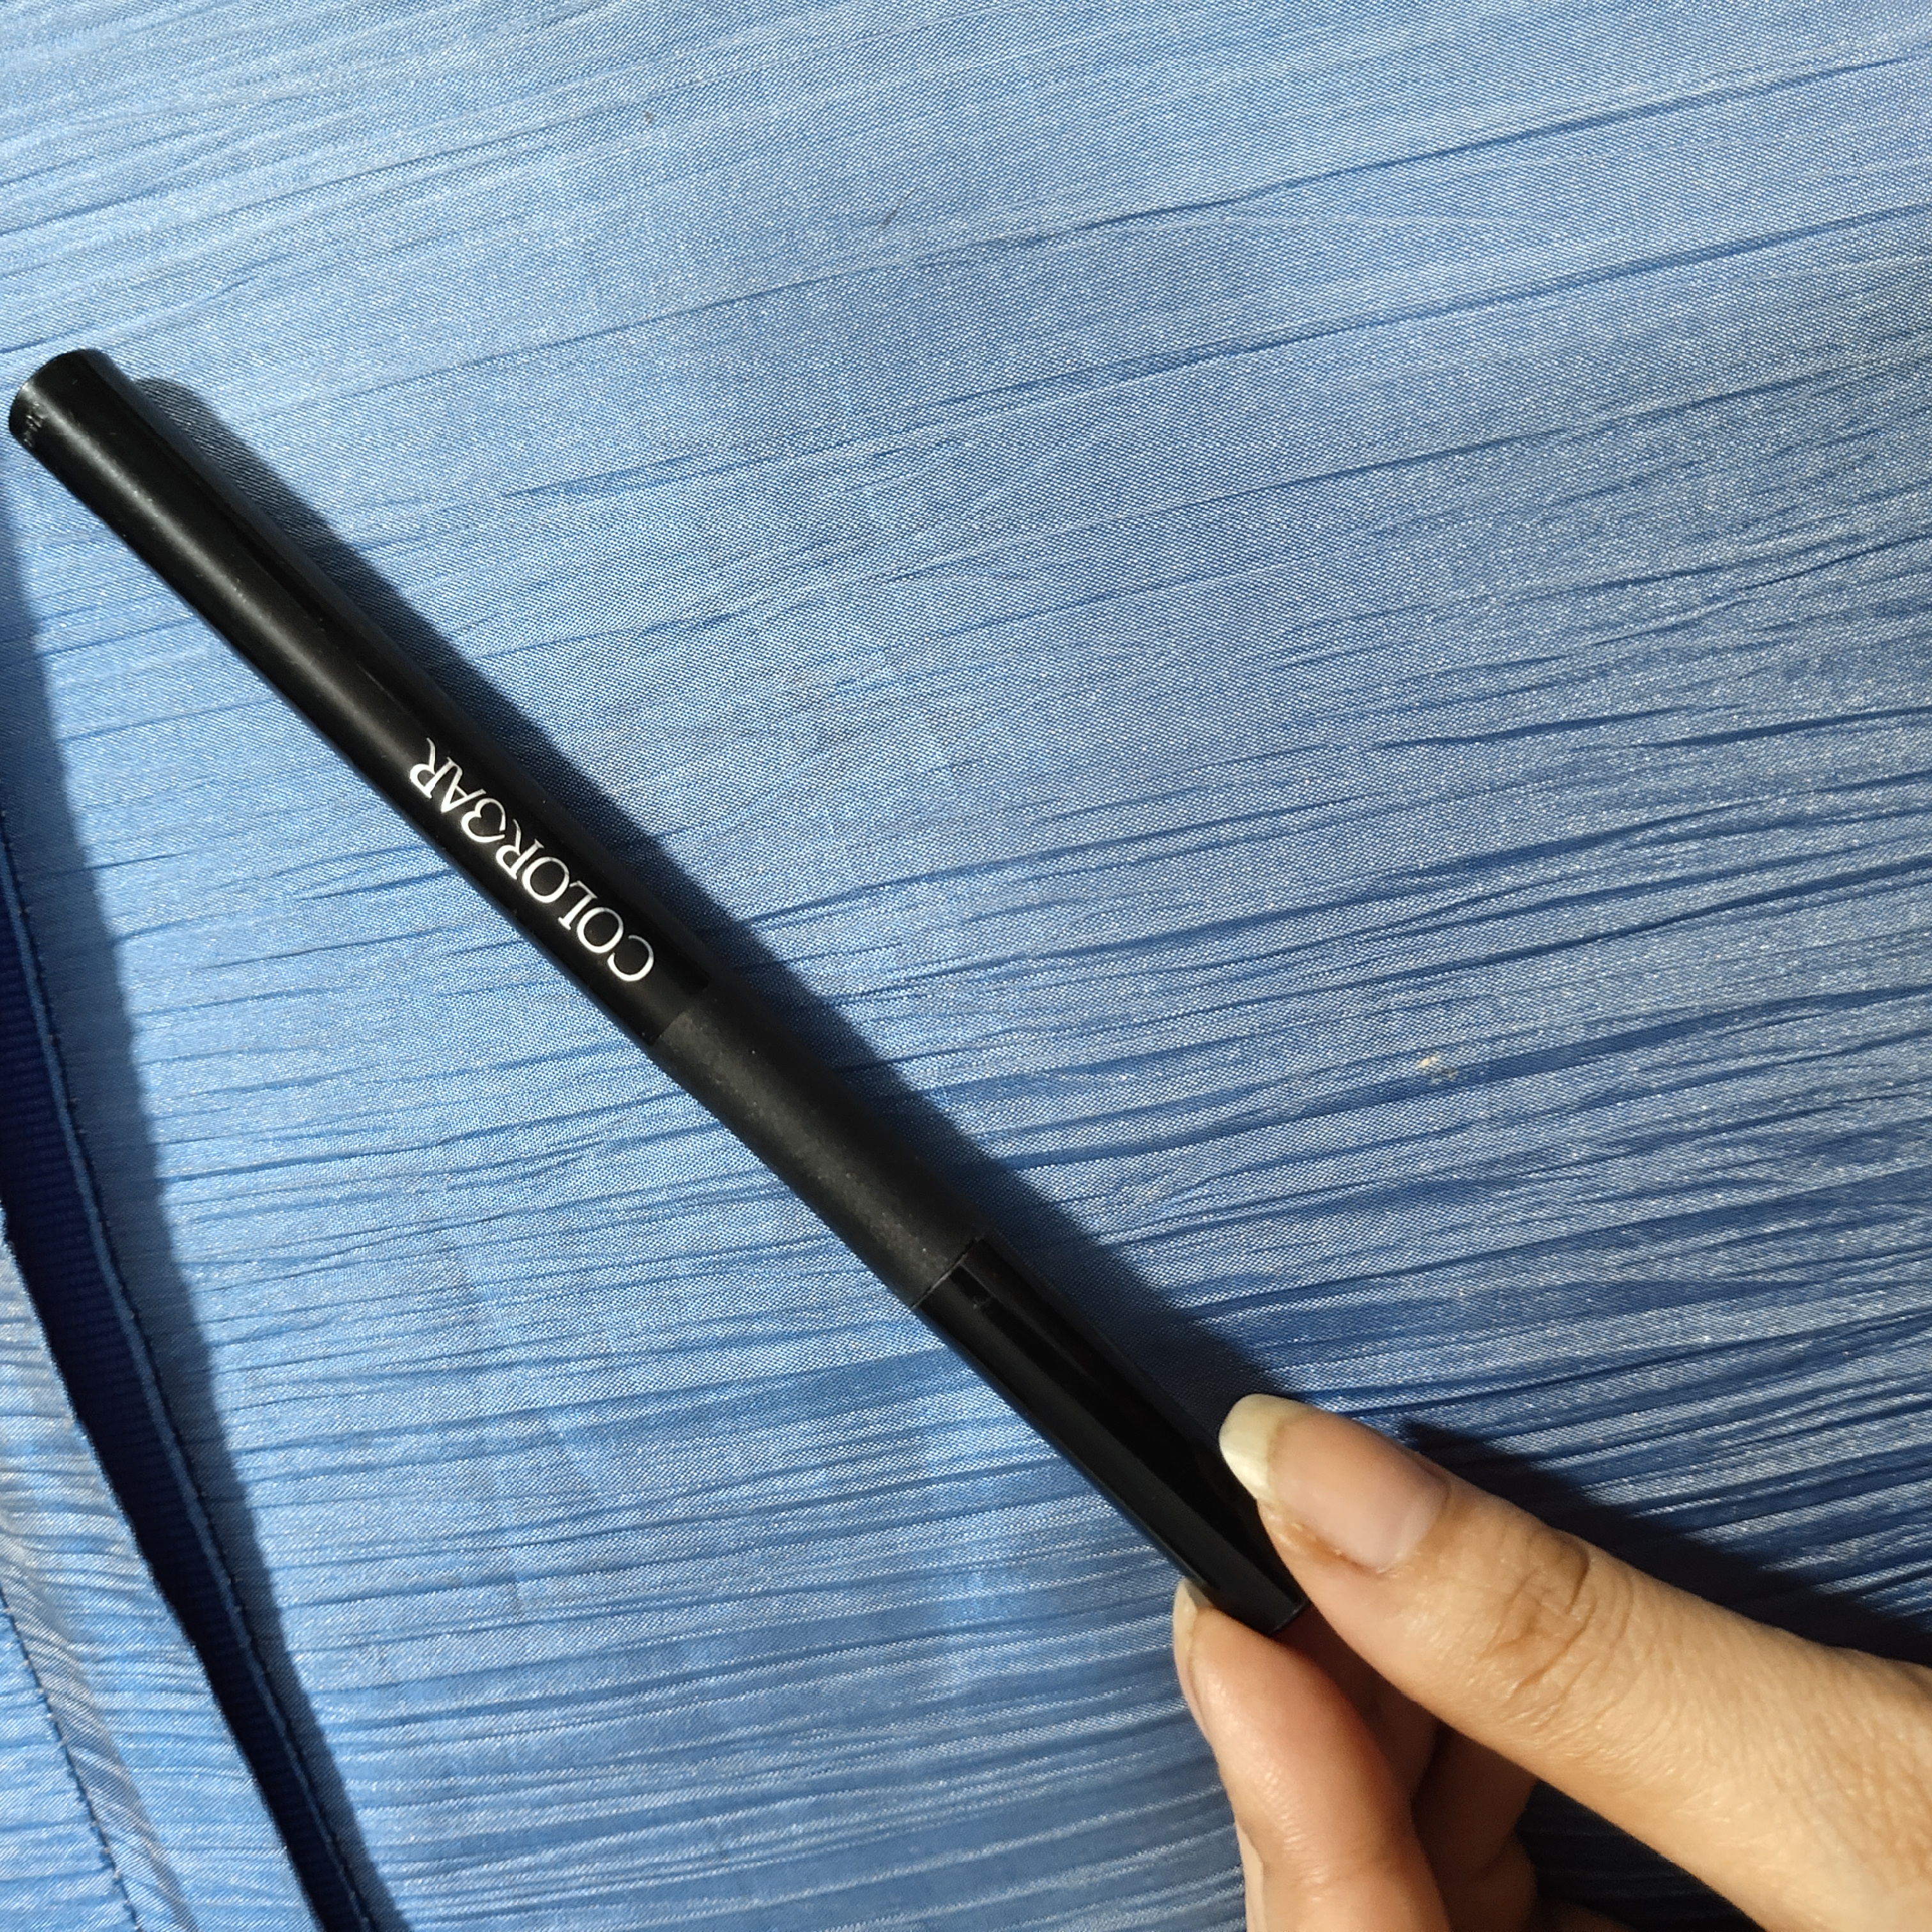 Colorbar Ultimate Eyeliner Reviews, Shades, Benefits, Price: How To Use It?